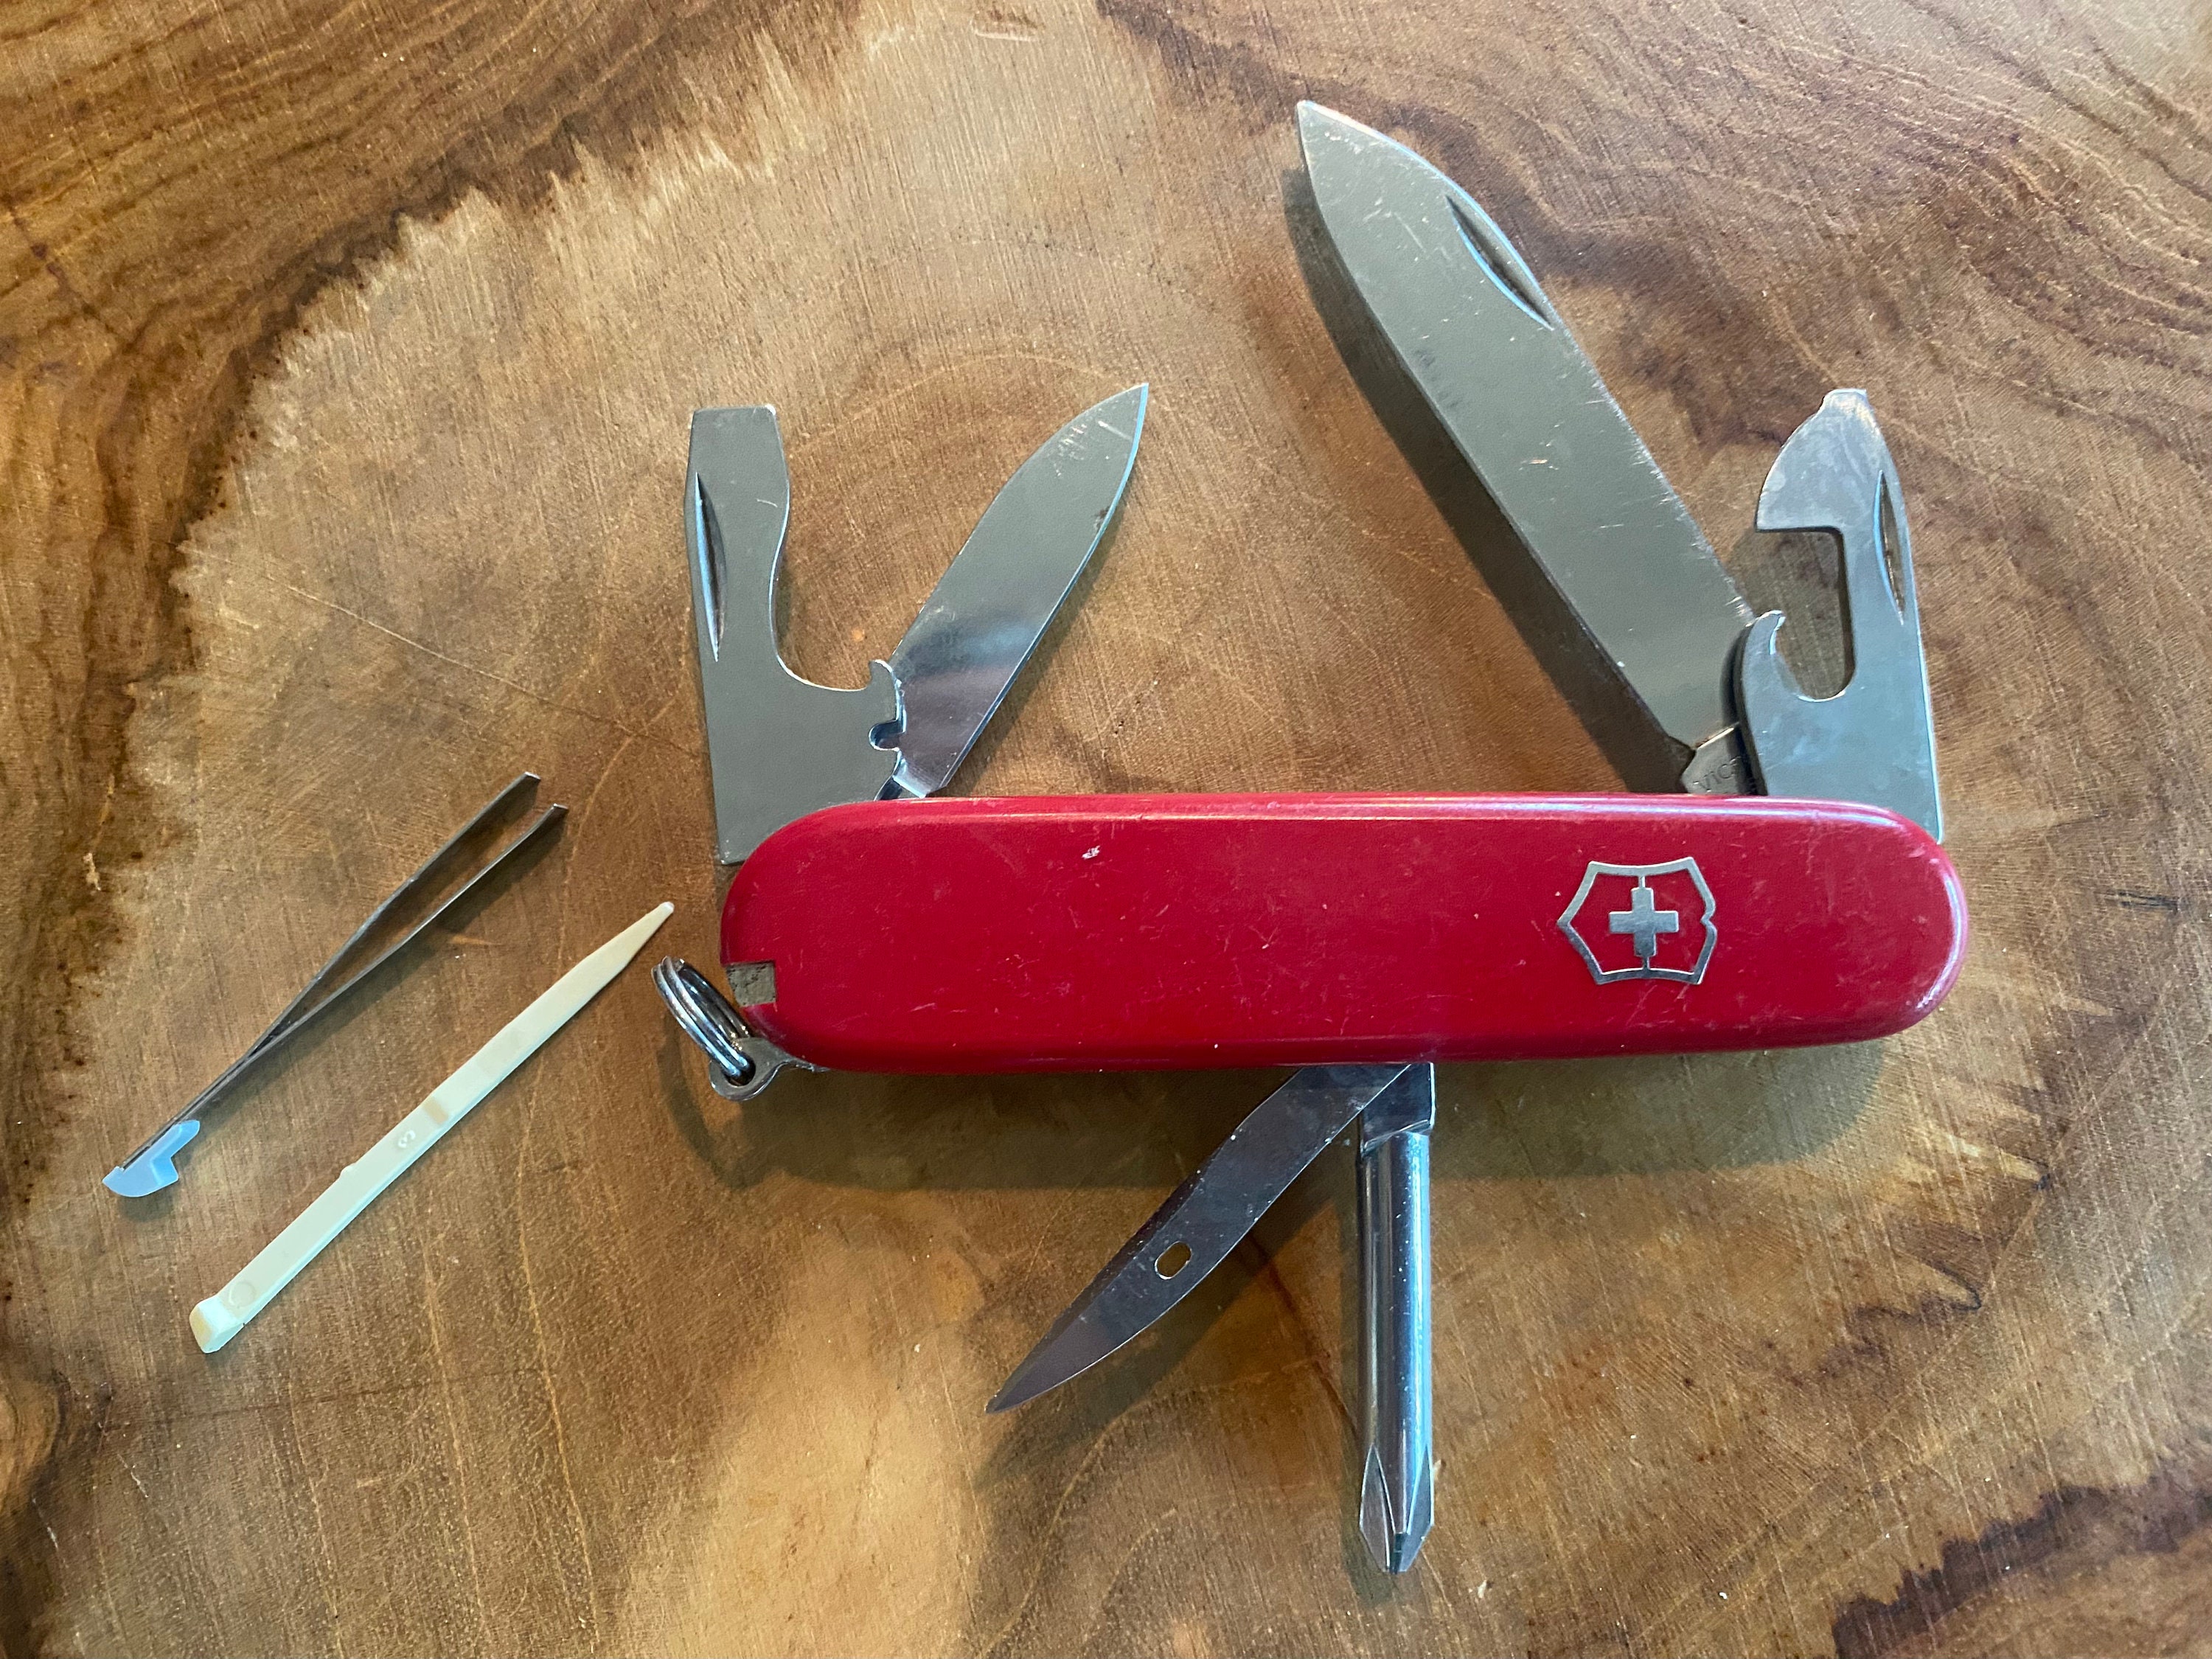 Embossed Aged Seigaiha wave Pattern Victorinox Classic SD Pocket Knife 